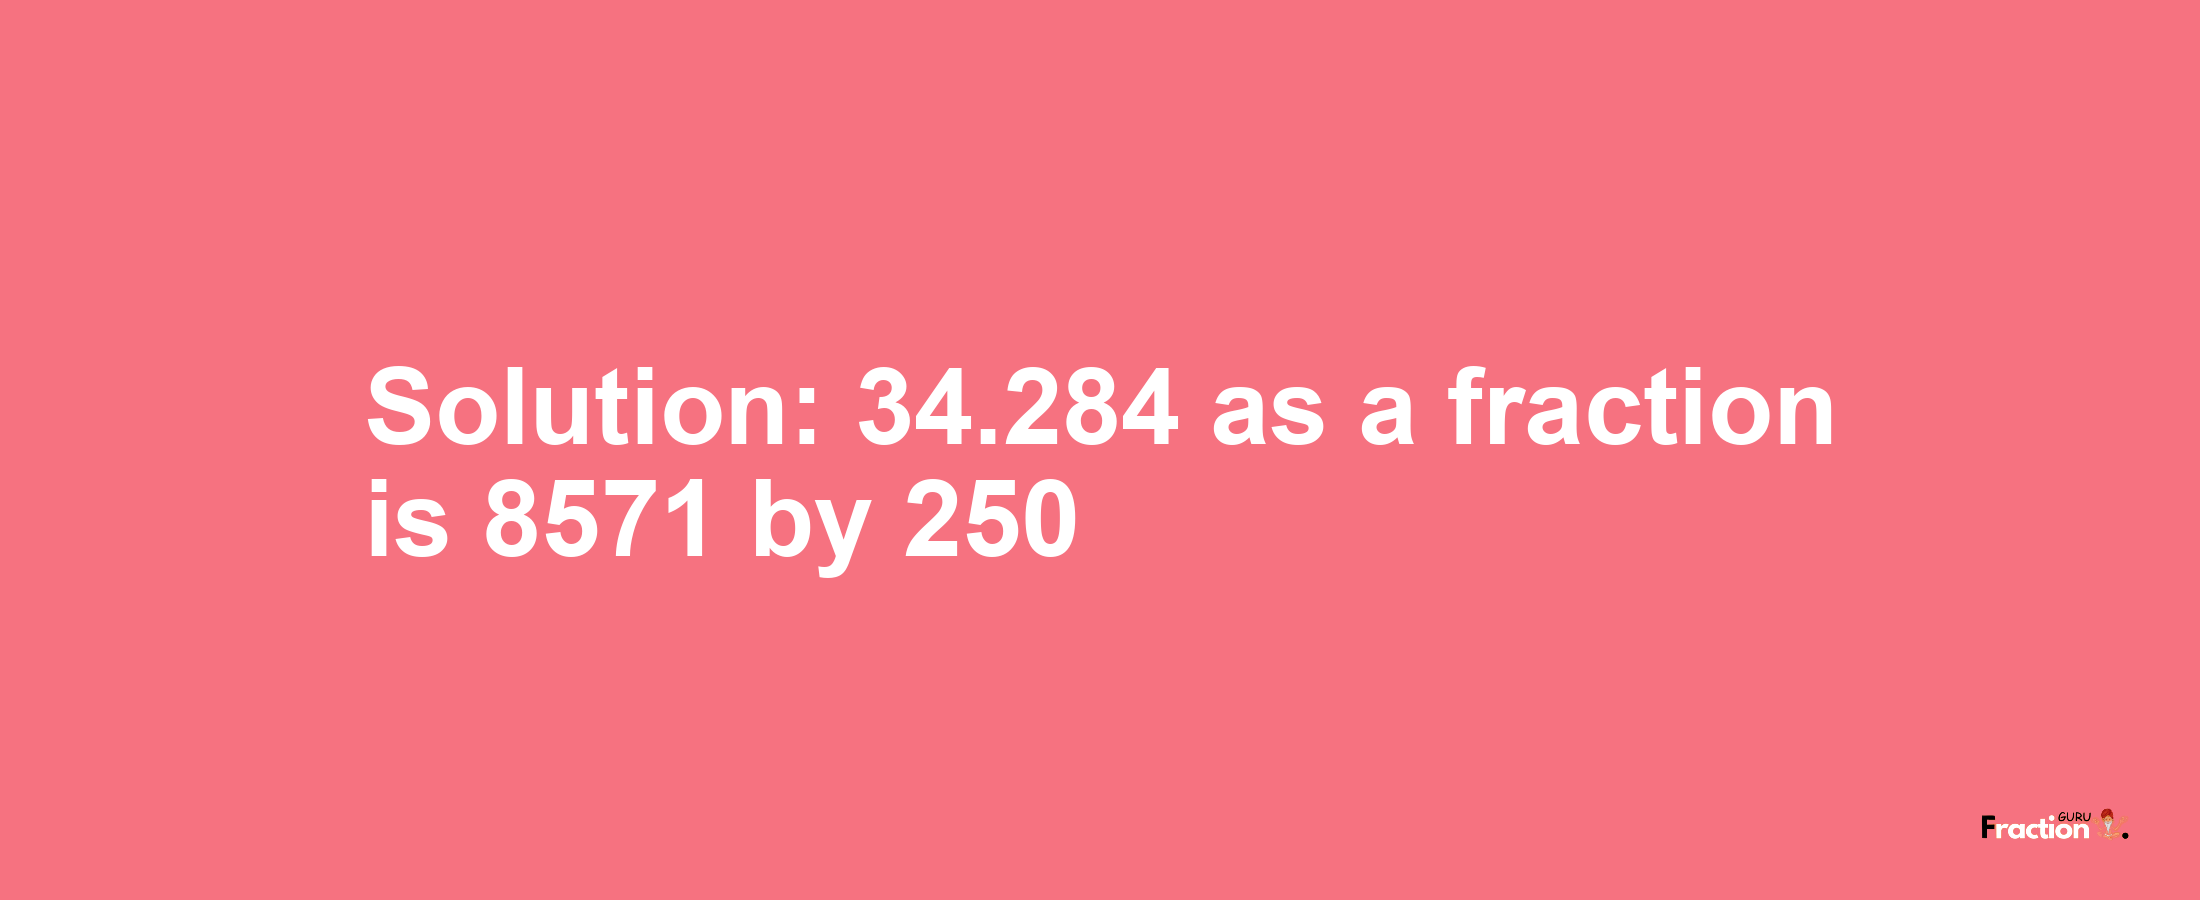 Solution:34.284 as a fraction is 8571/250